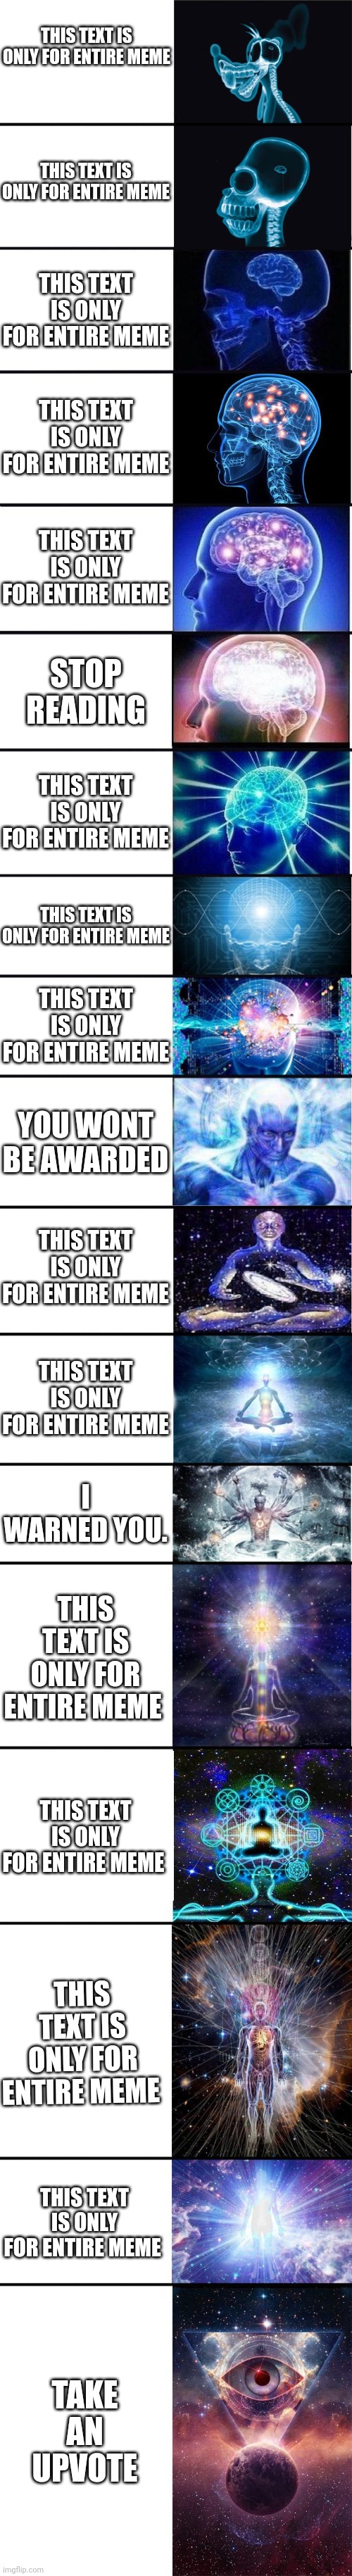 This text is only for entire meme | THIS TEXT IS ONLY FOR ENTIRE MEME; THIS TEXT IS ONLY FOR ENTIRE MEME; THIS TEXT IS ONLY FOR ENTIRE MEME; THIS TEXT IS ONLY FOR ENTIRE MEME; THIS TEXT IS ONLY FOR ENTIRE MEME; STOP READING; THIS TEXT IS ONLY FOR ENTIRE MEME; THIS TEXT IS ONLY FOR ENTIRE MEME; THIS TEXT IS ONLY FOR ENTIRE MEME; YOU WONT BE AWARDED; THIS TEXT IS ONLY FOR ENTIRE MEME; THIS TEXT IS ONLY FOR ENTIRE MEME; I WARNED YOU. THIS TEXT IS ONLY FOR ENTIRE MEME; THIS TEXT IS ONLY FOR ENTIRE MEME; THIS TEXT IS ONLY FOR ENTIRE MEME; THIS TEXT IS ONLY FOR ENTIRE MEME; TAKE AN UPVOTE | image tagged in expanding brain 9001 | made w/ Imgflip meme maker